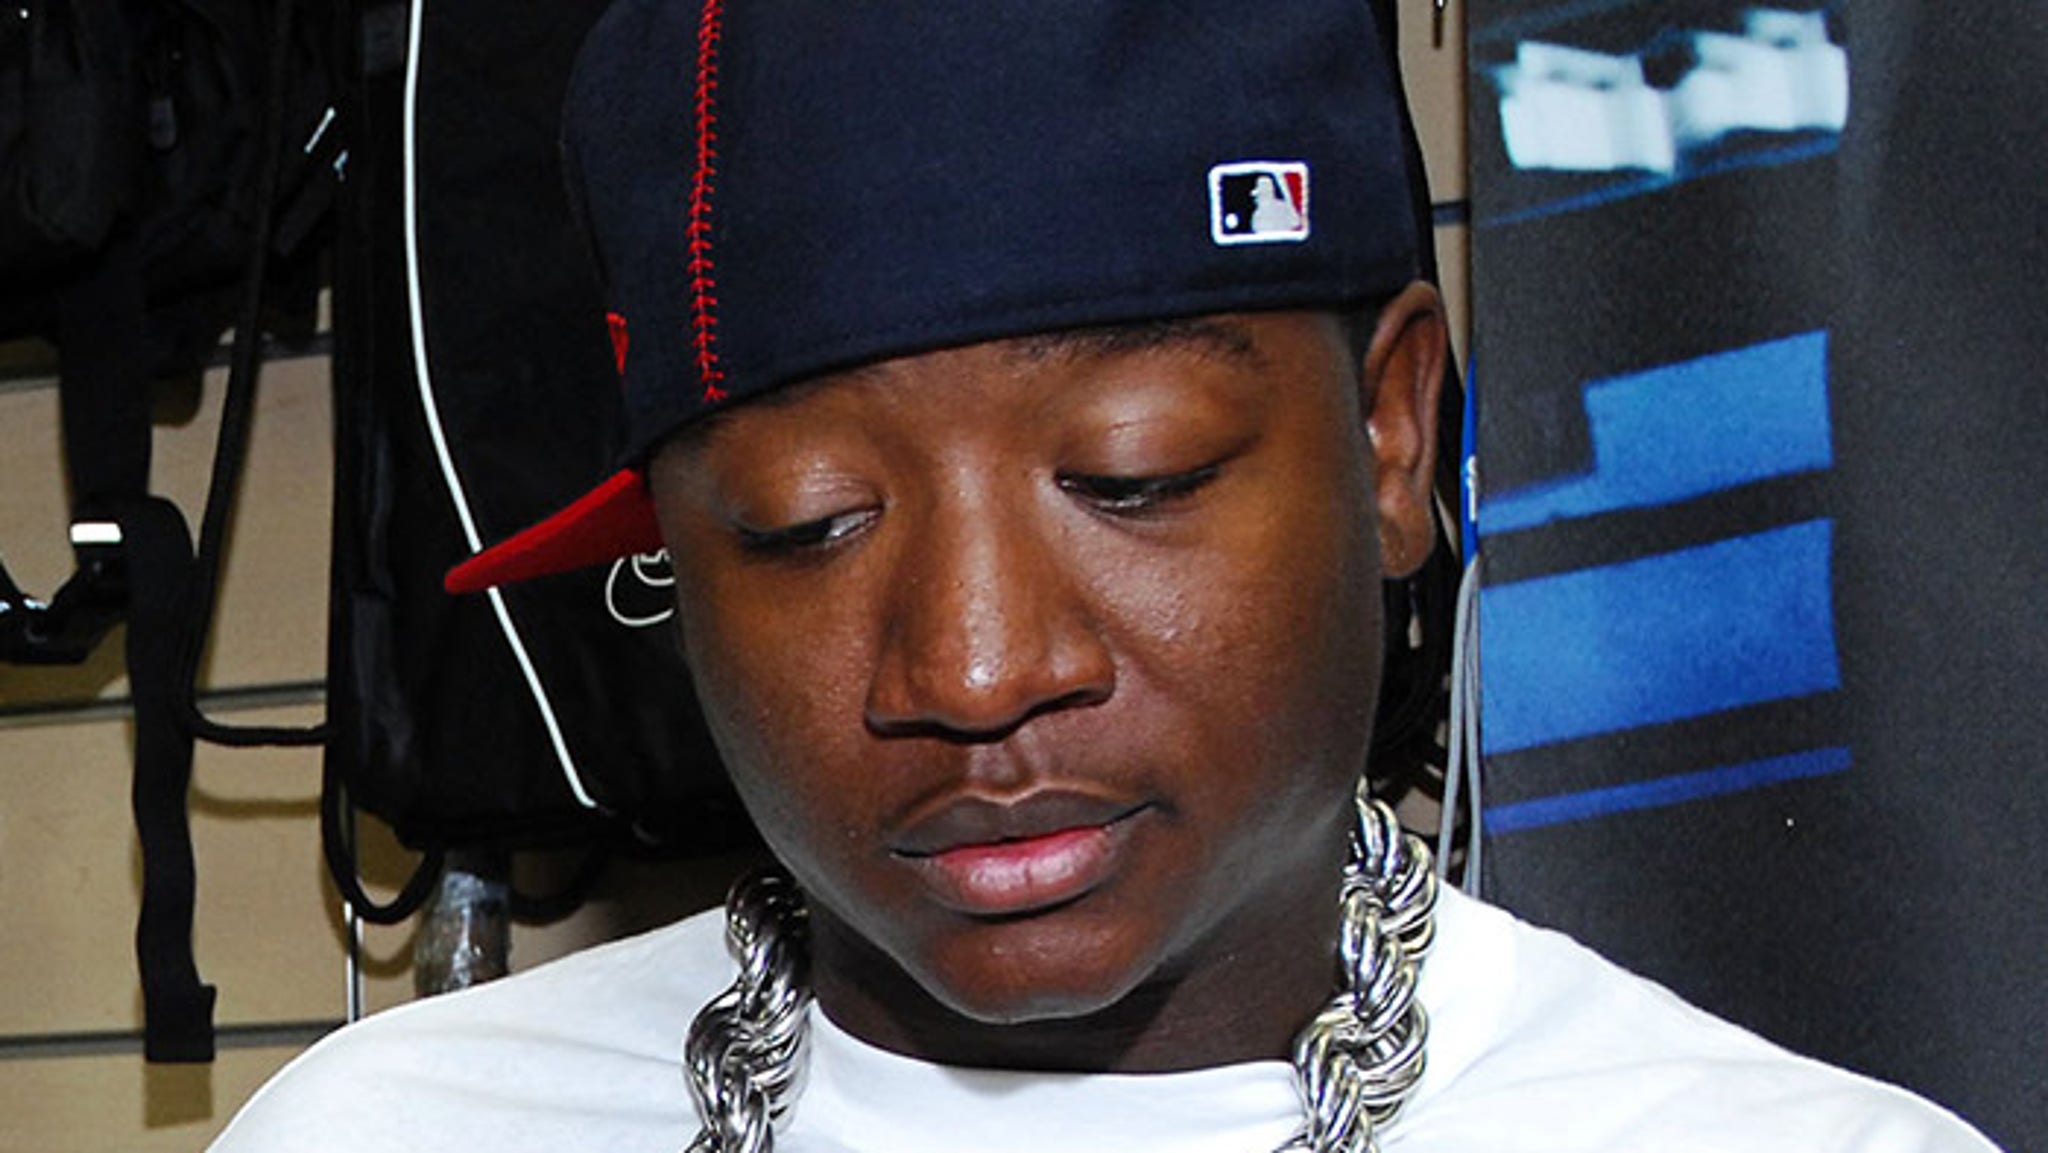 Yung Joc #39 s Wife Keep Your Sidepiece I #39 m Divorcing You